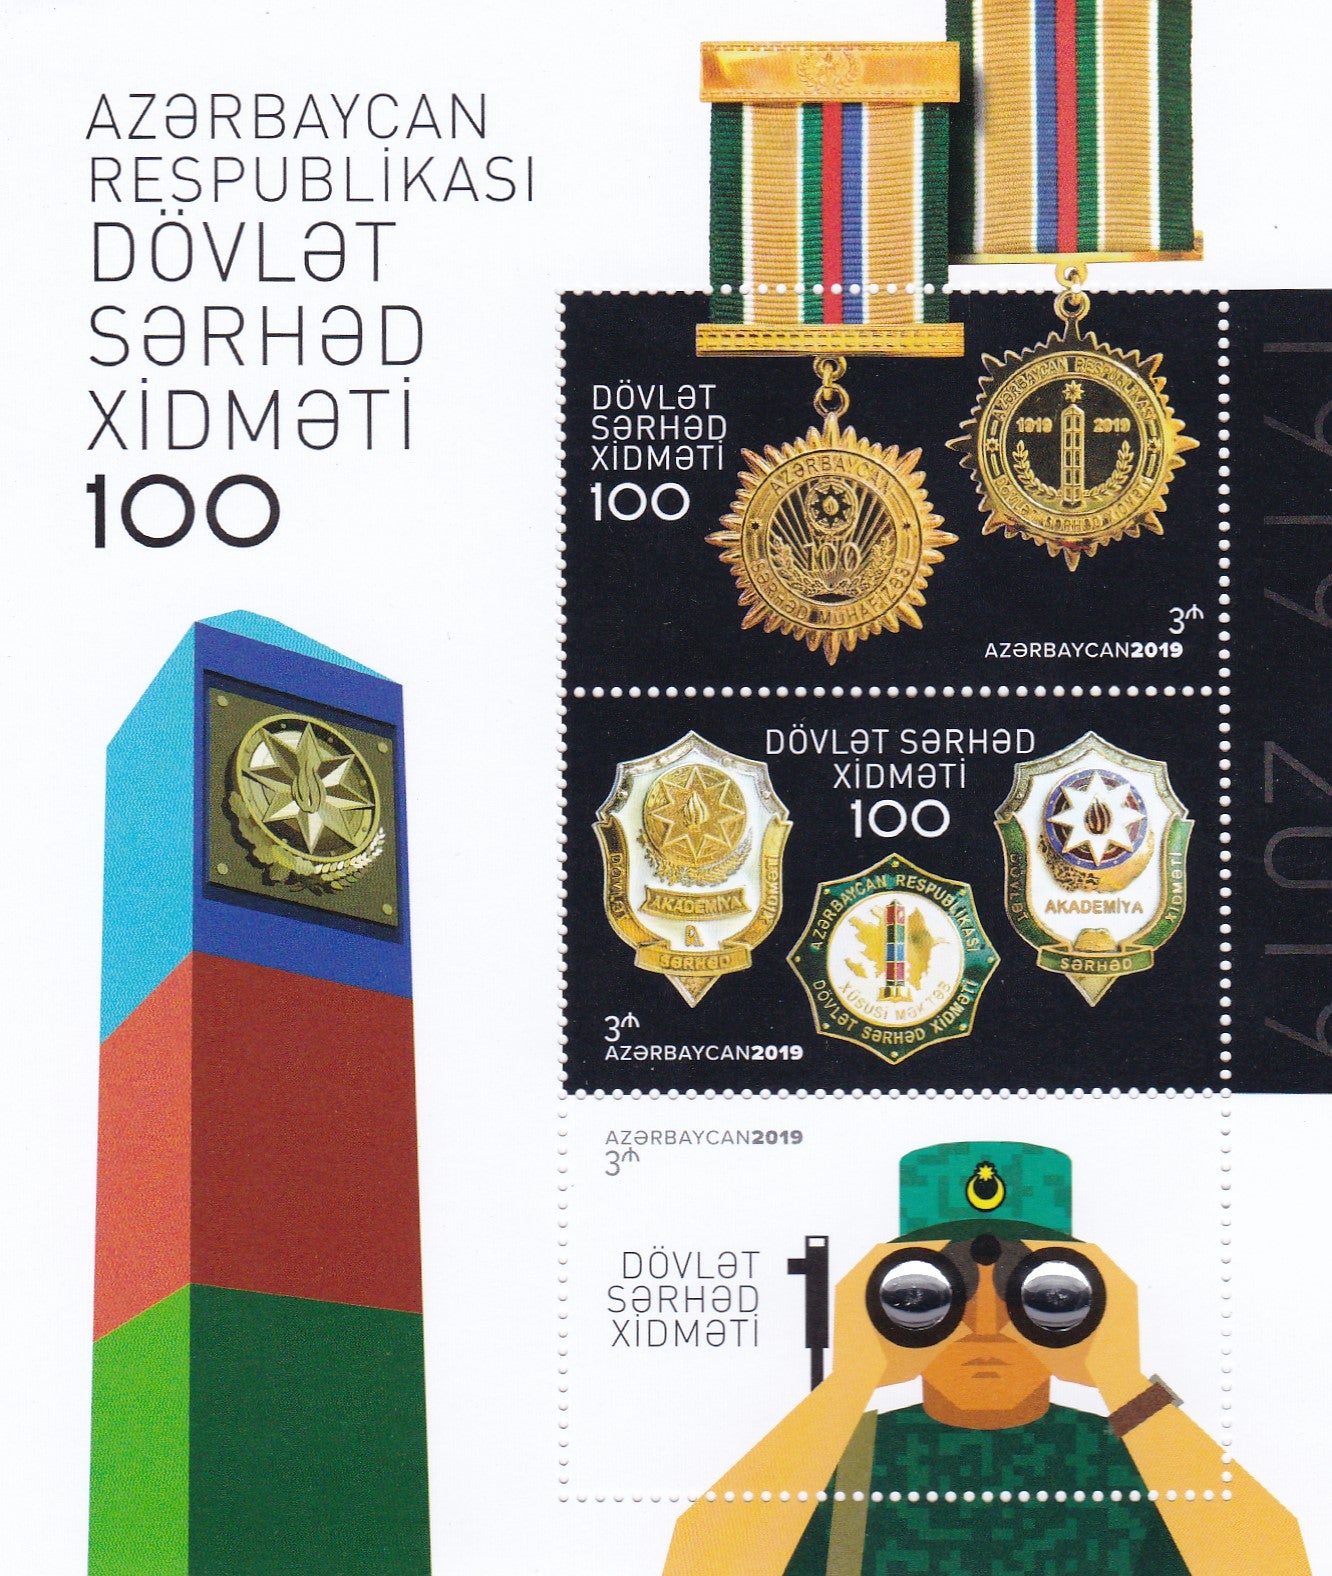 Azerbaijan-Unusual stamp with binacular glass attached.